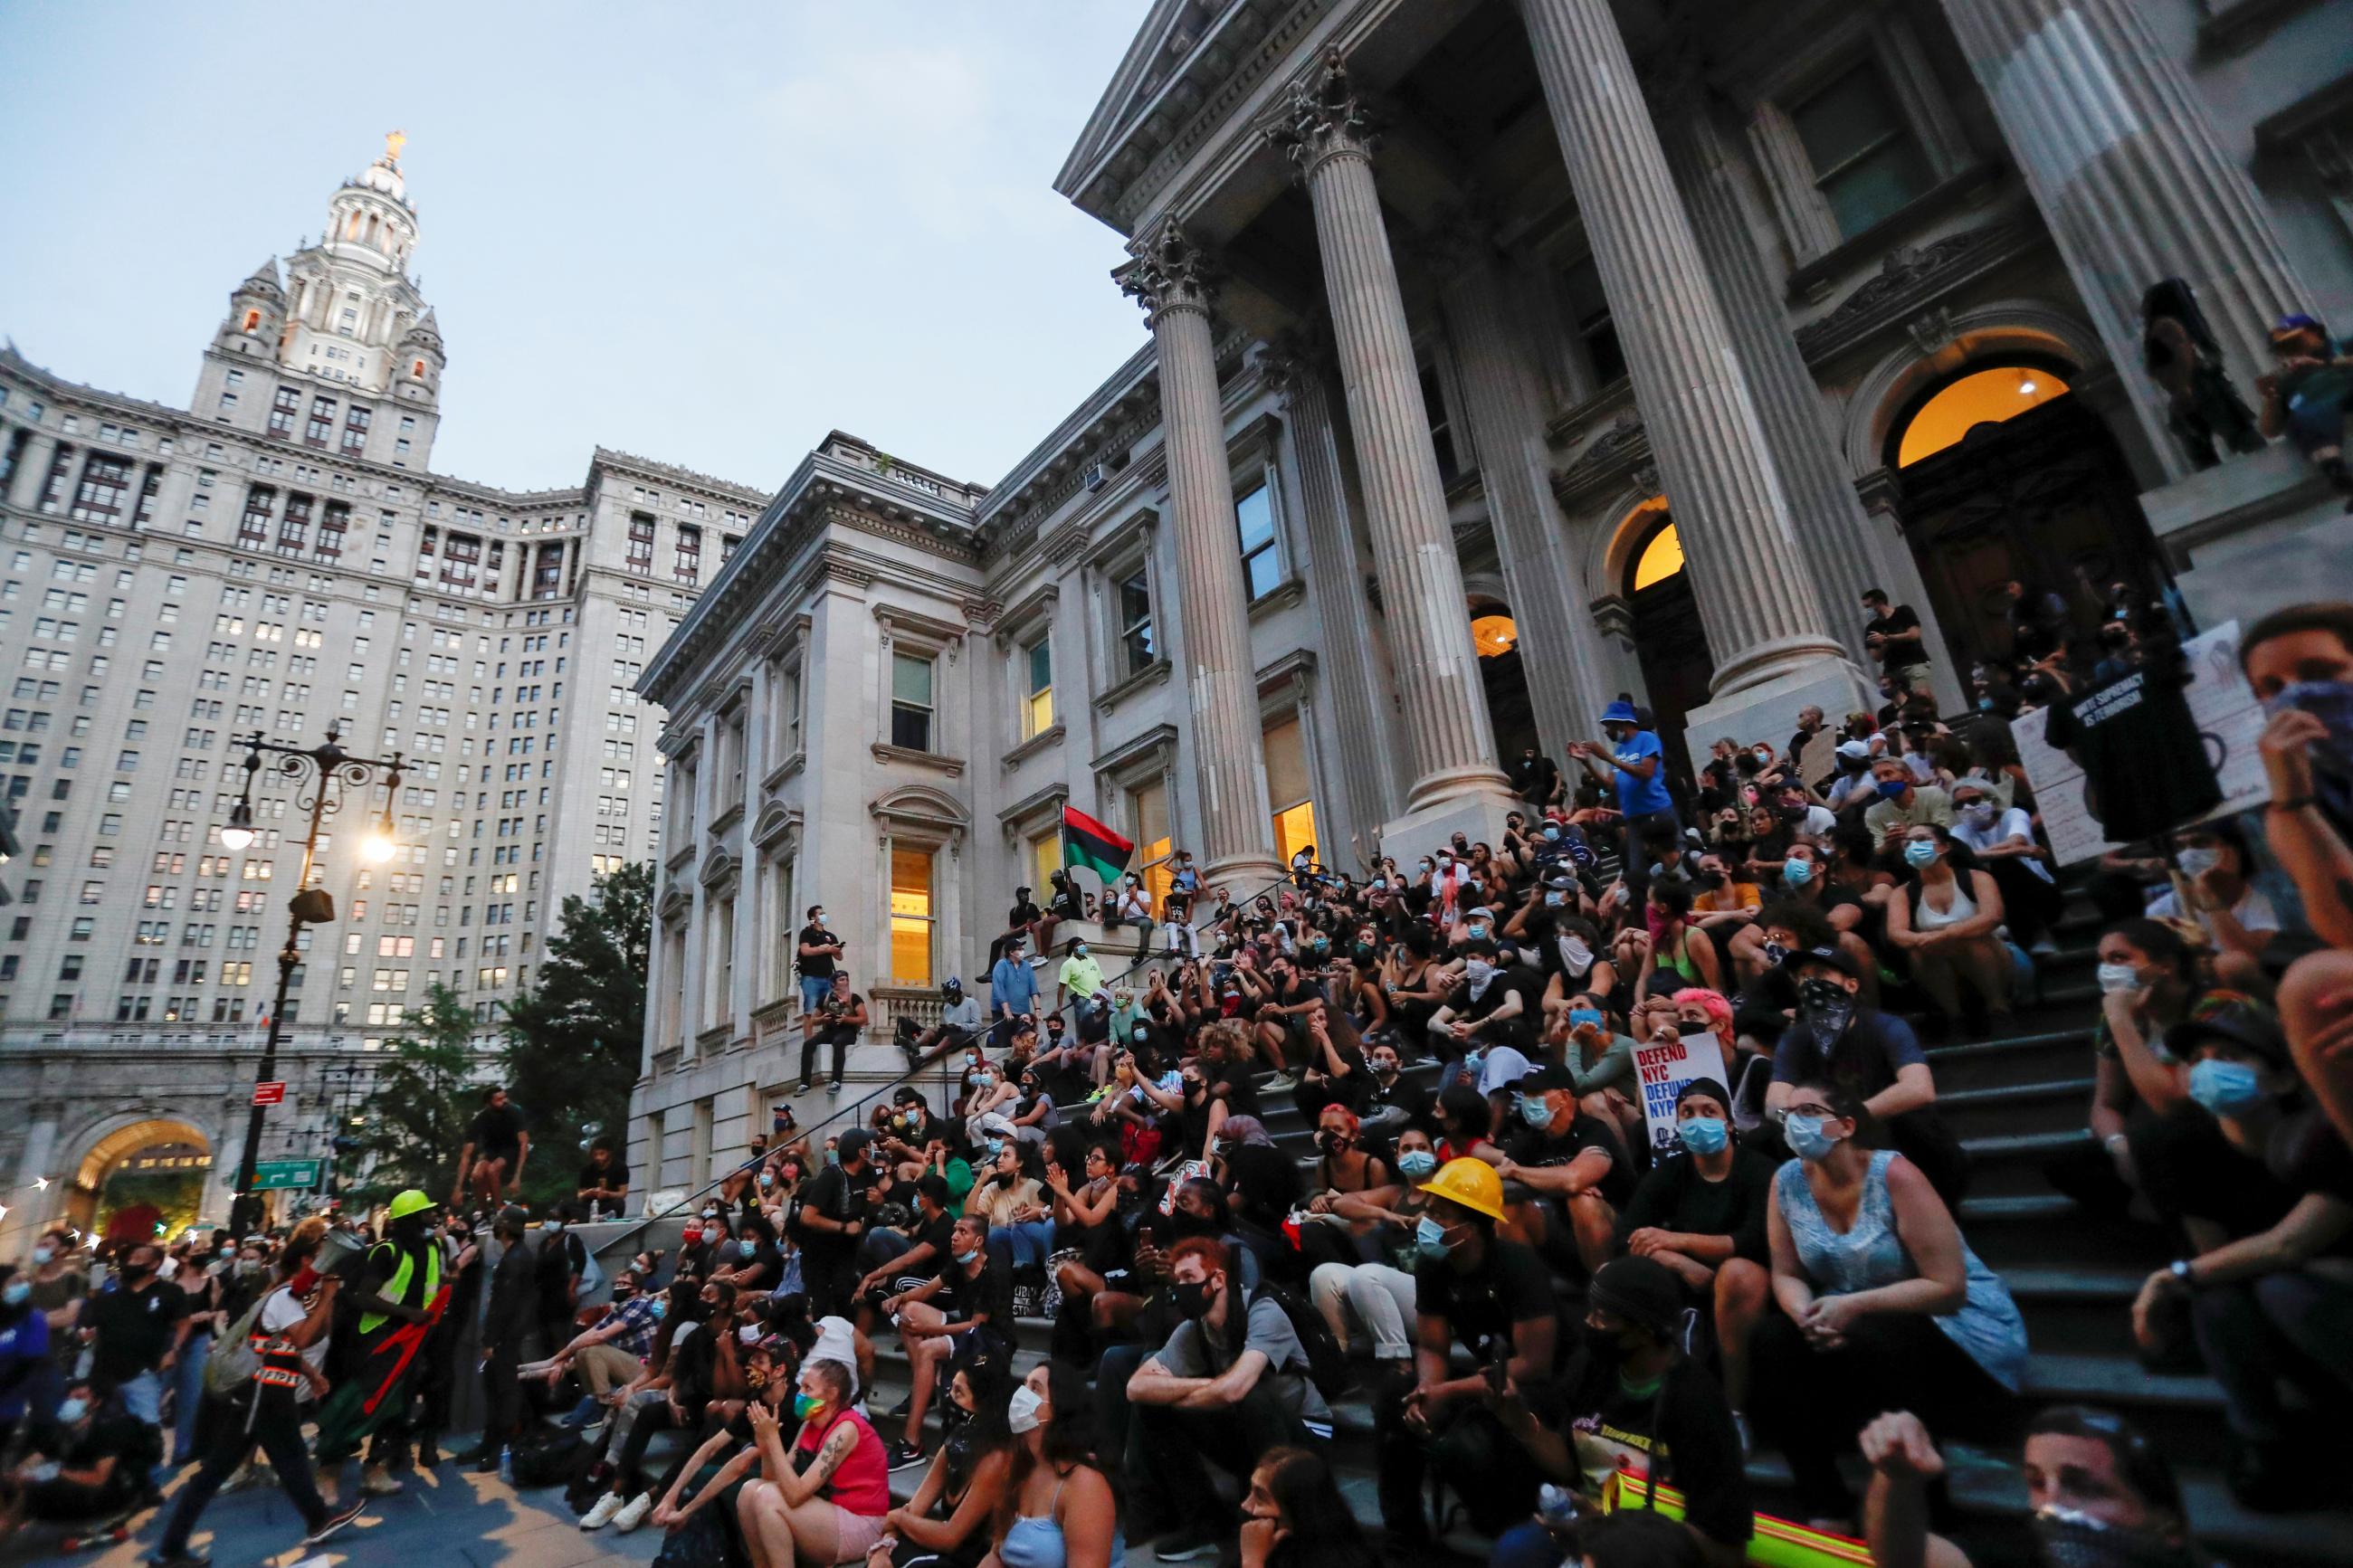 Demonstrators gather to protest in support of "Black Lives Matter" near City Hall in lower Manhattan, in New York City on June 30, 2020.